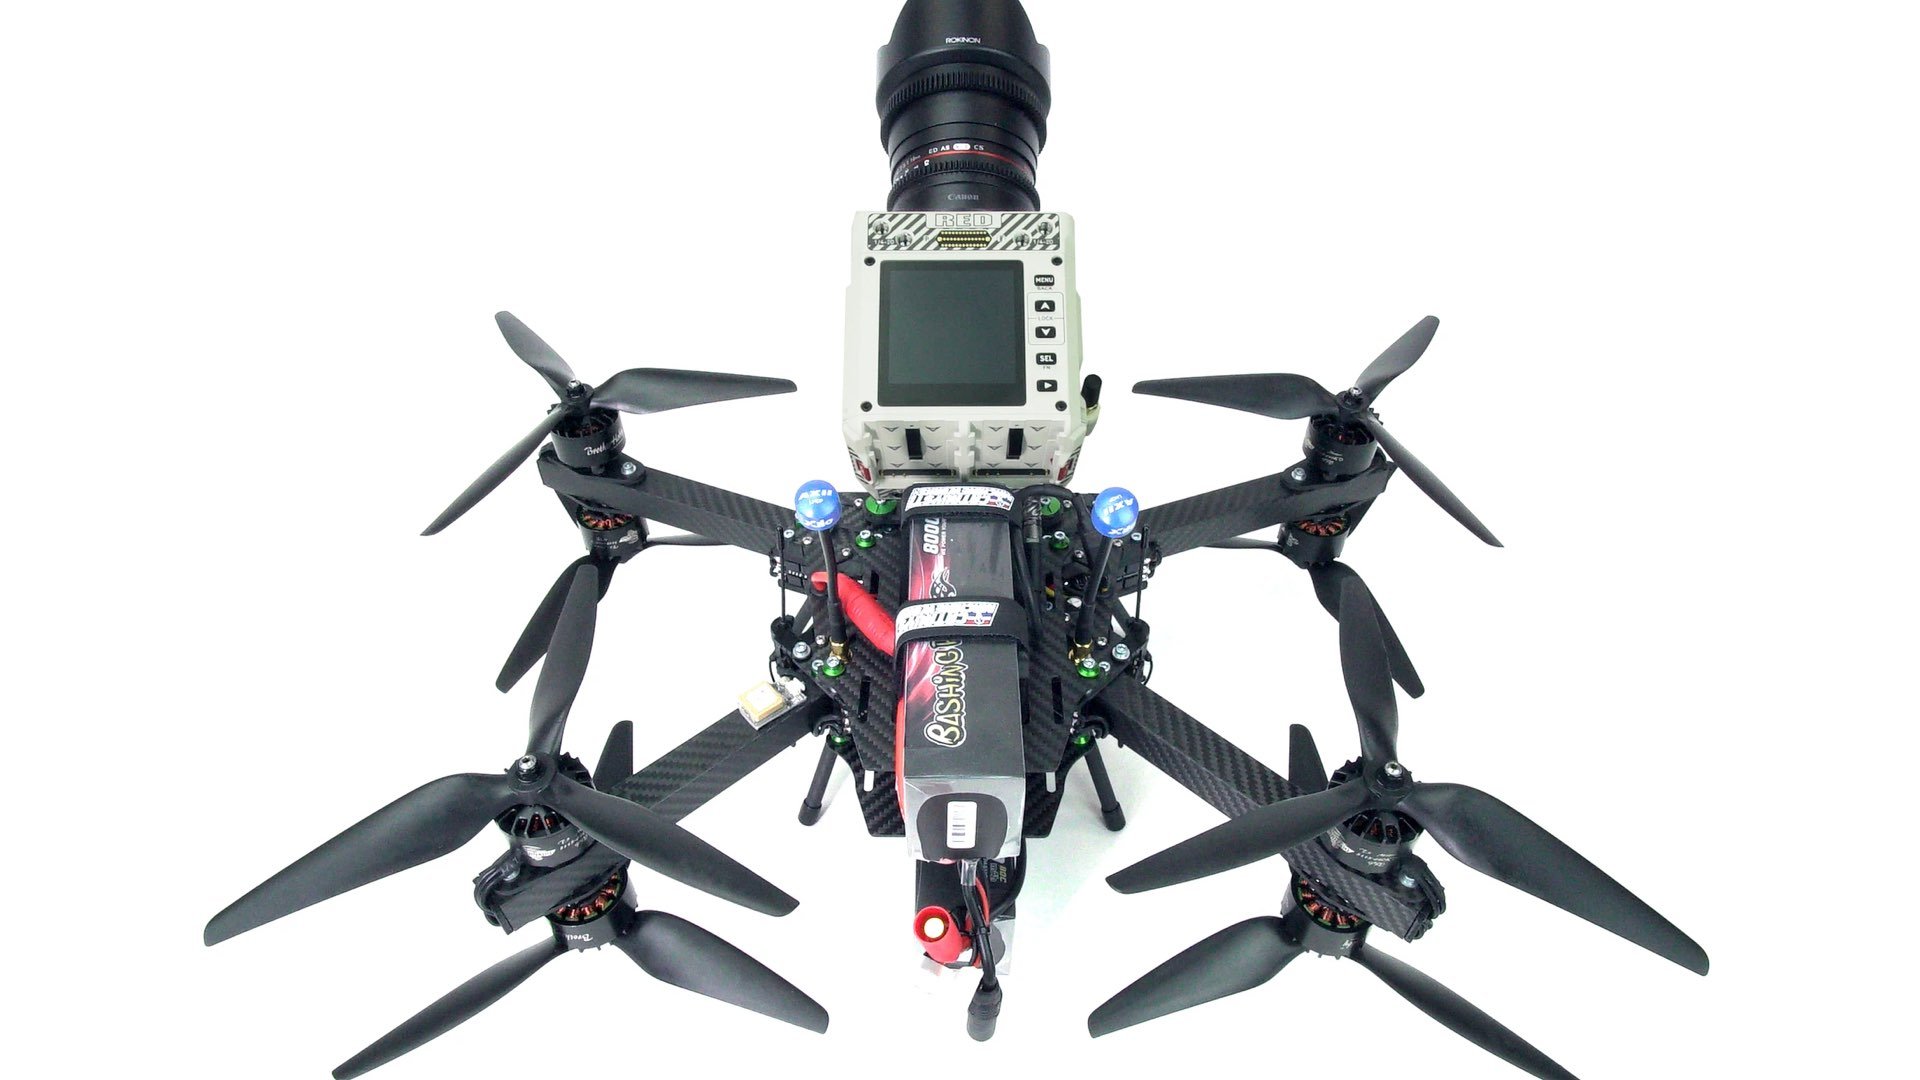 Image of Cine FPV drone equipped to lift Red Komodo and Black Magic Pocket 6k Camera, commonly utilized in car commercials and action movies.